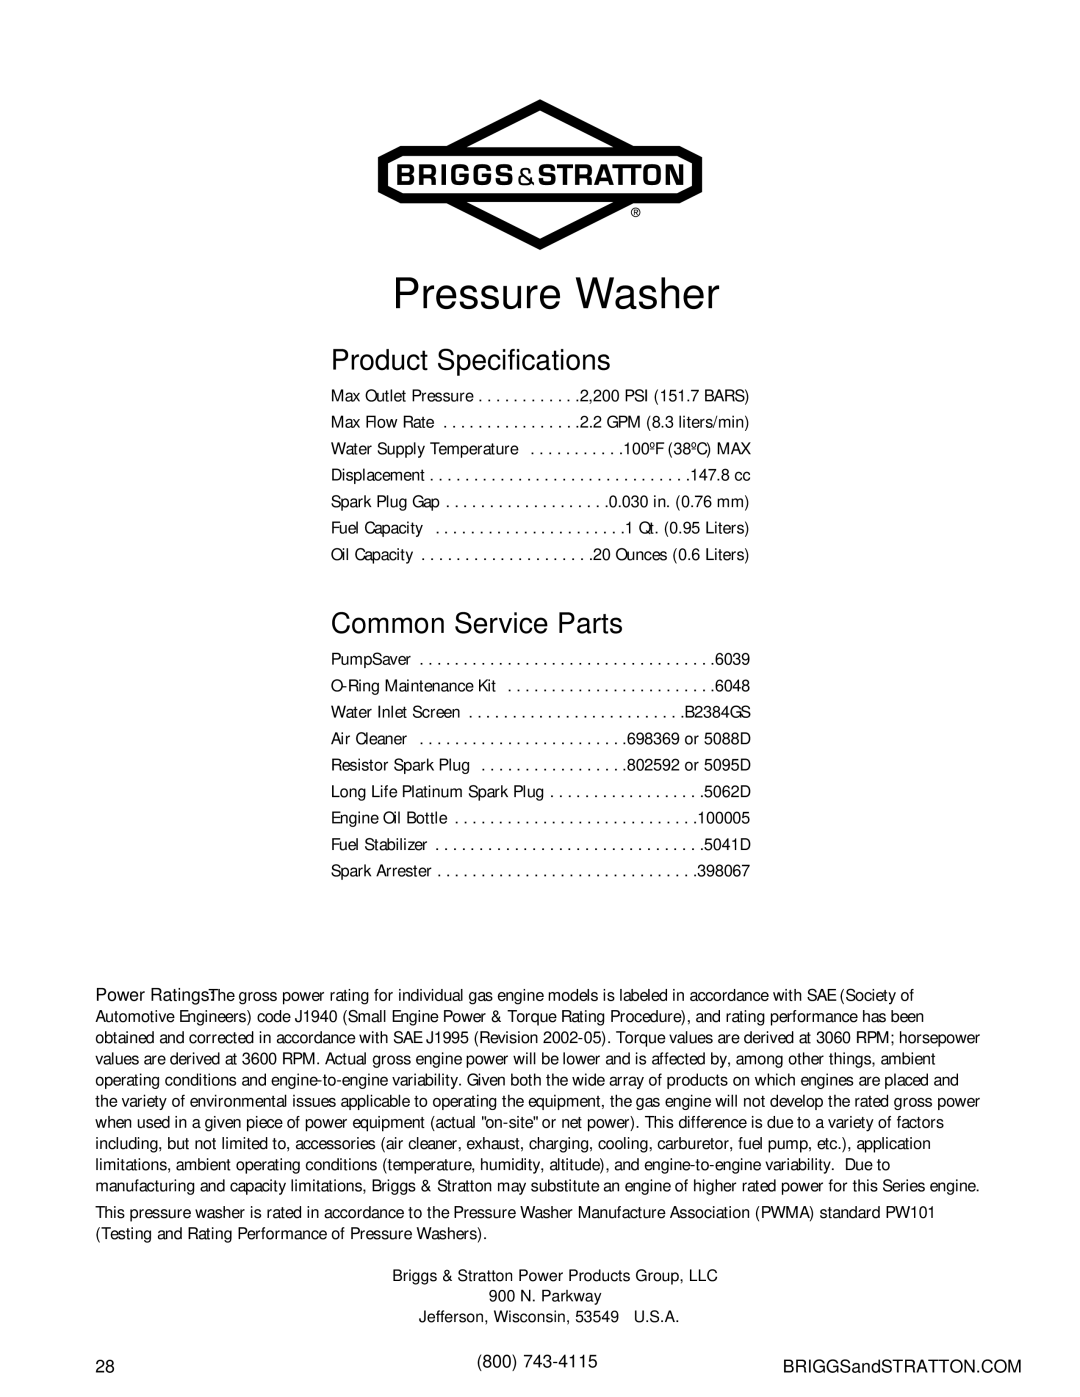 Briggs & Stratton Pressure Washer manual Product Specifications, Common Service Parts, 800 